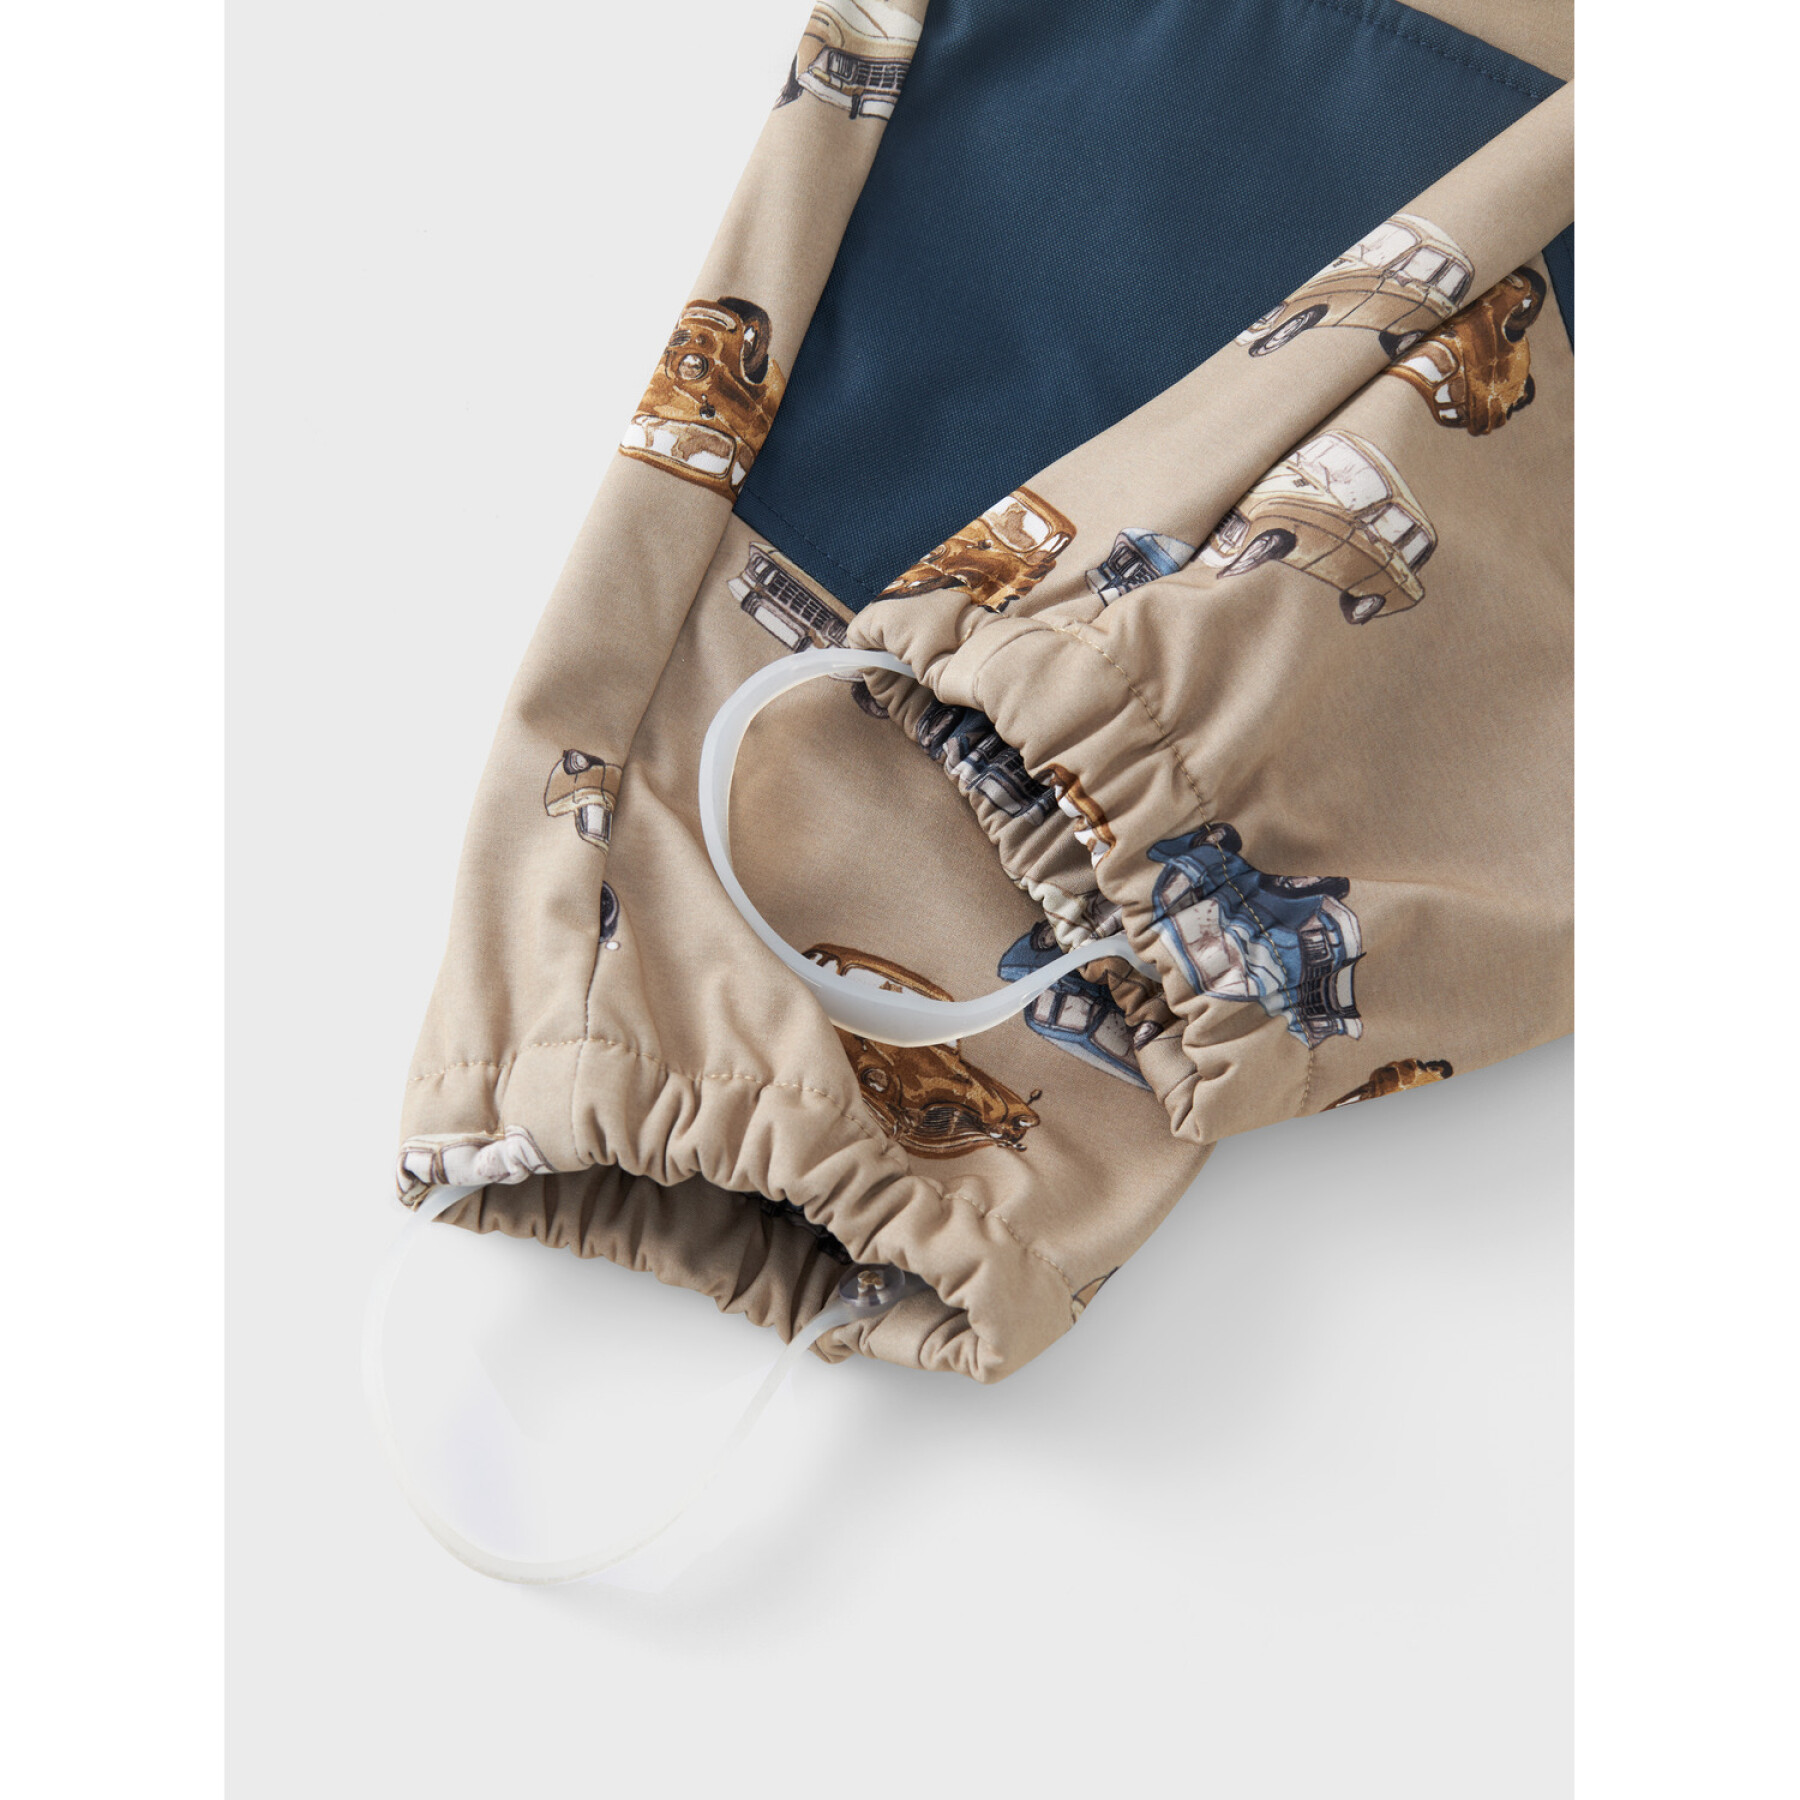 Softshell-Overall, Baby, Jungen Name it Alfa08 AOP